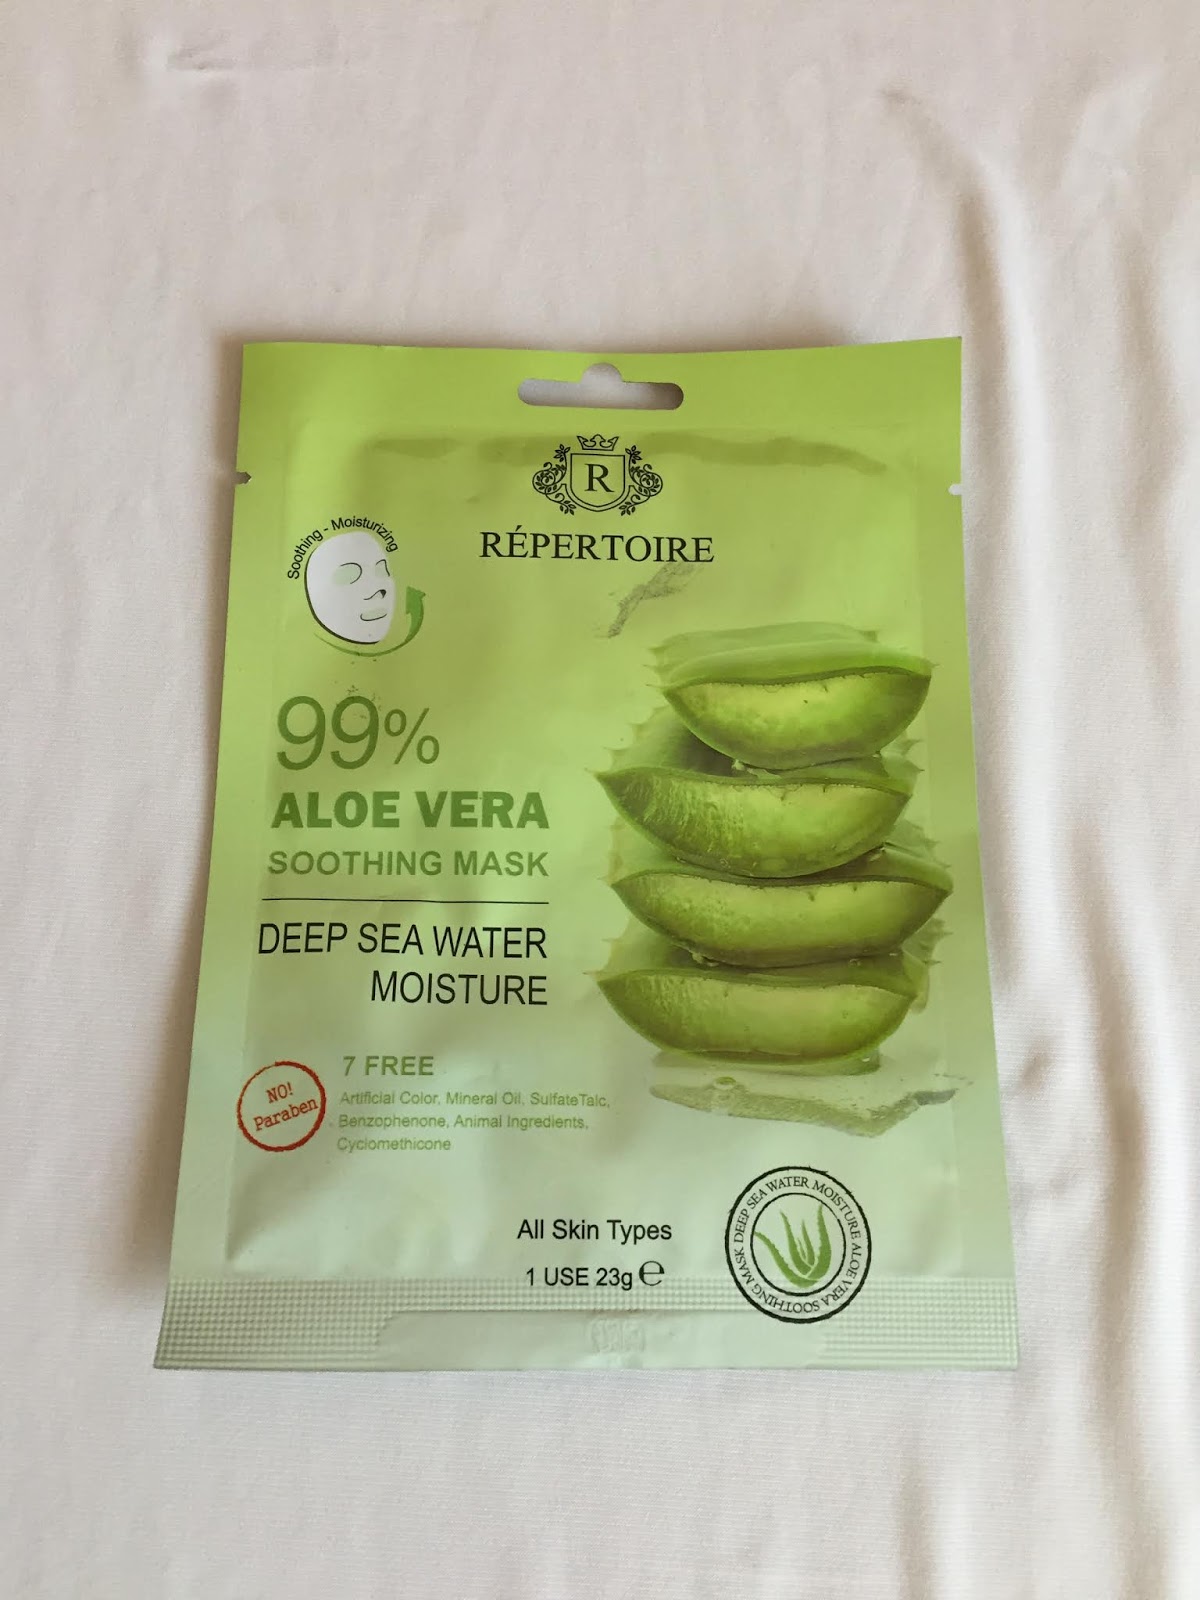 Repertoire Aloe Vera Soothing Gel Online Discount Shop For Electronics Apparel Toys Books Games Computers Shoes Jewelry Watches Baby Products Sports Outdoors Office Products Bed Bath Furniture Tools Hardware